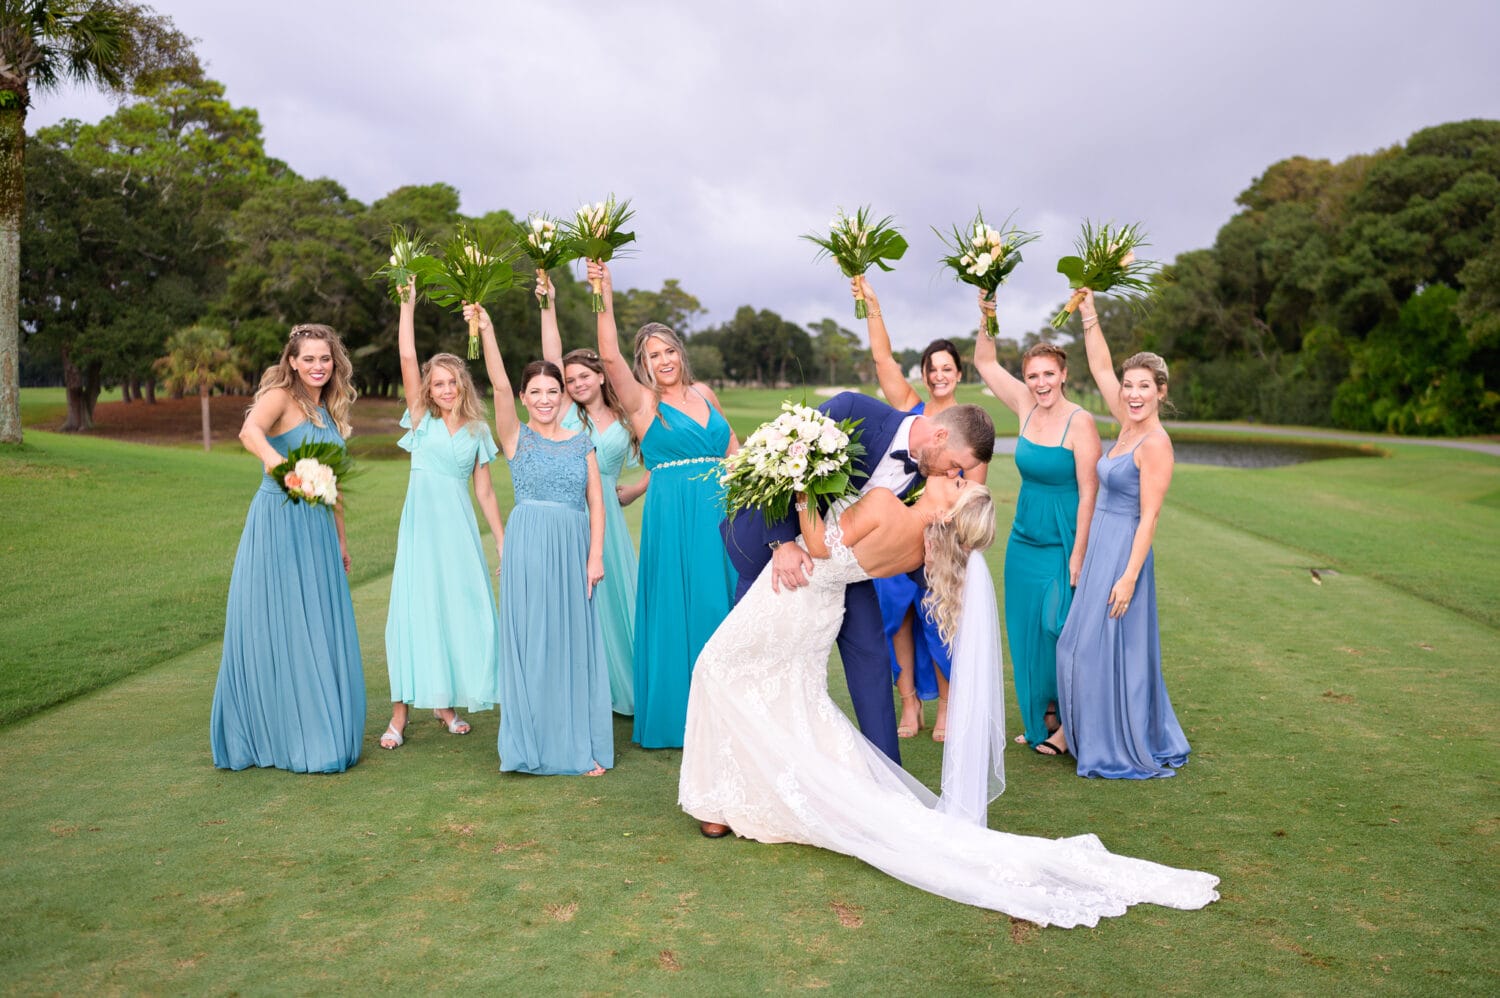 Kiss with bridesmaids cheering in the background - Dunes Golf and Beach Club